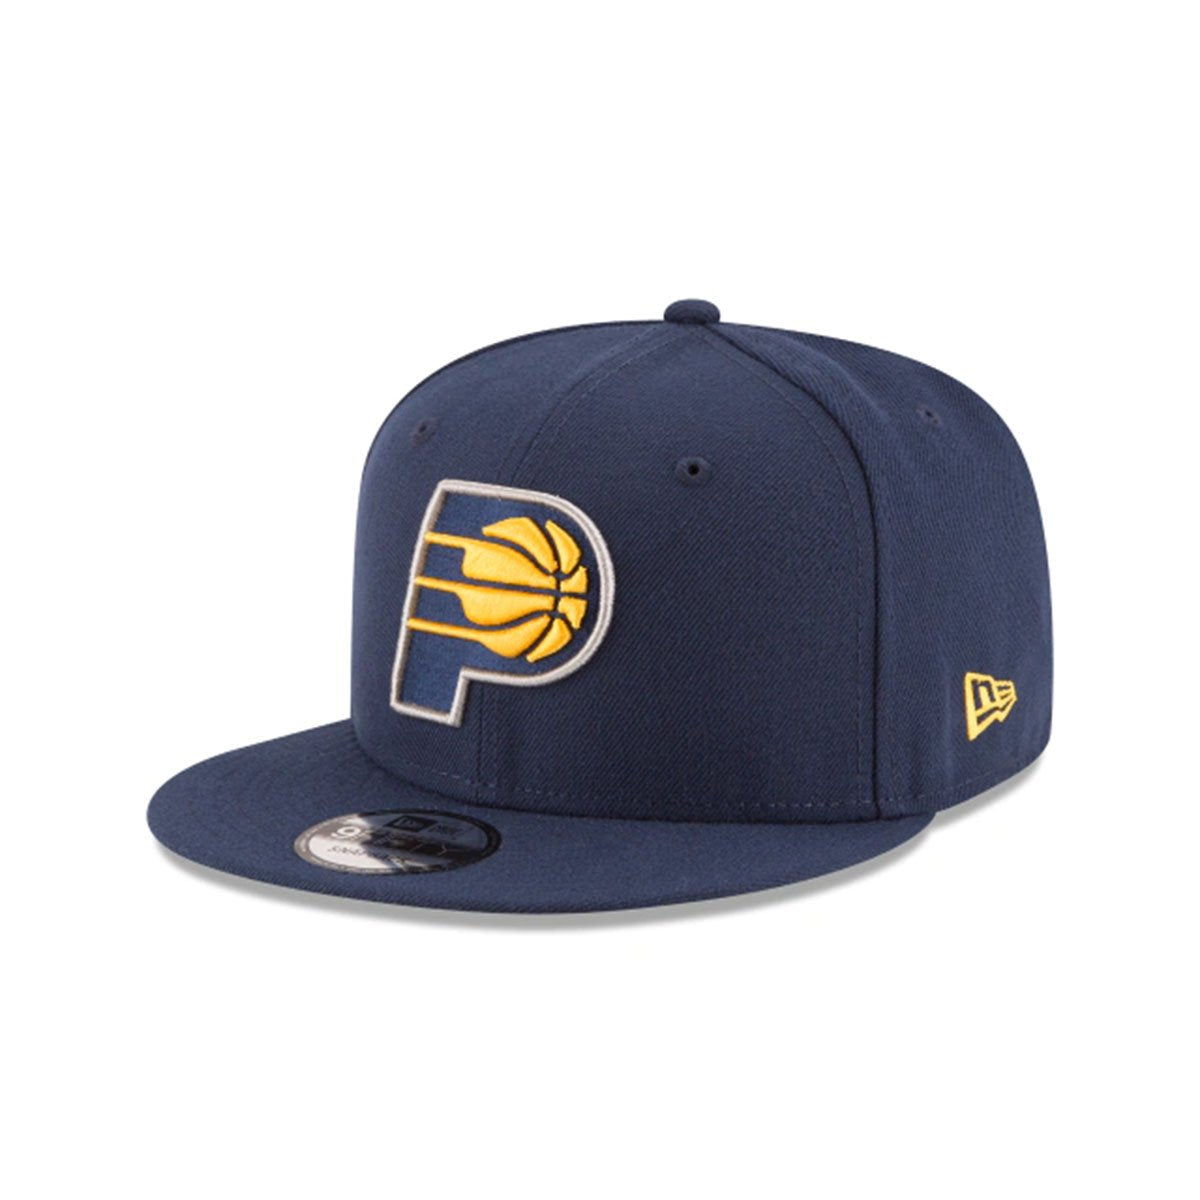 INDIANA PACERS 9FIFTY Snapback NAVY/YELLOW